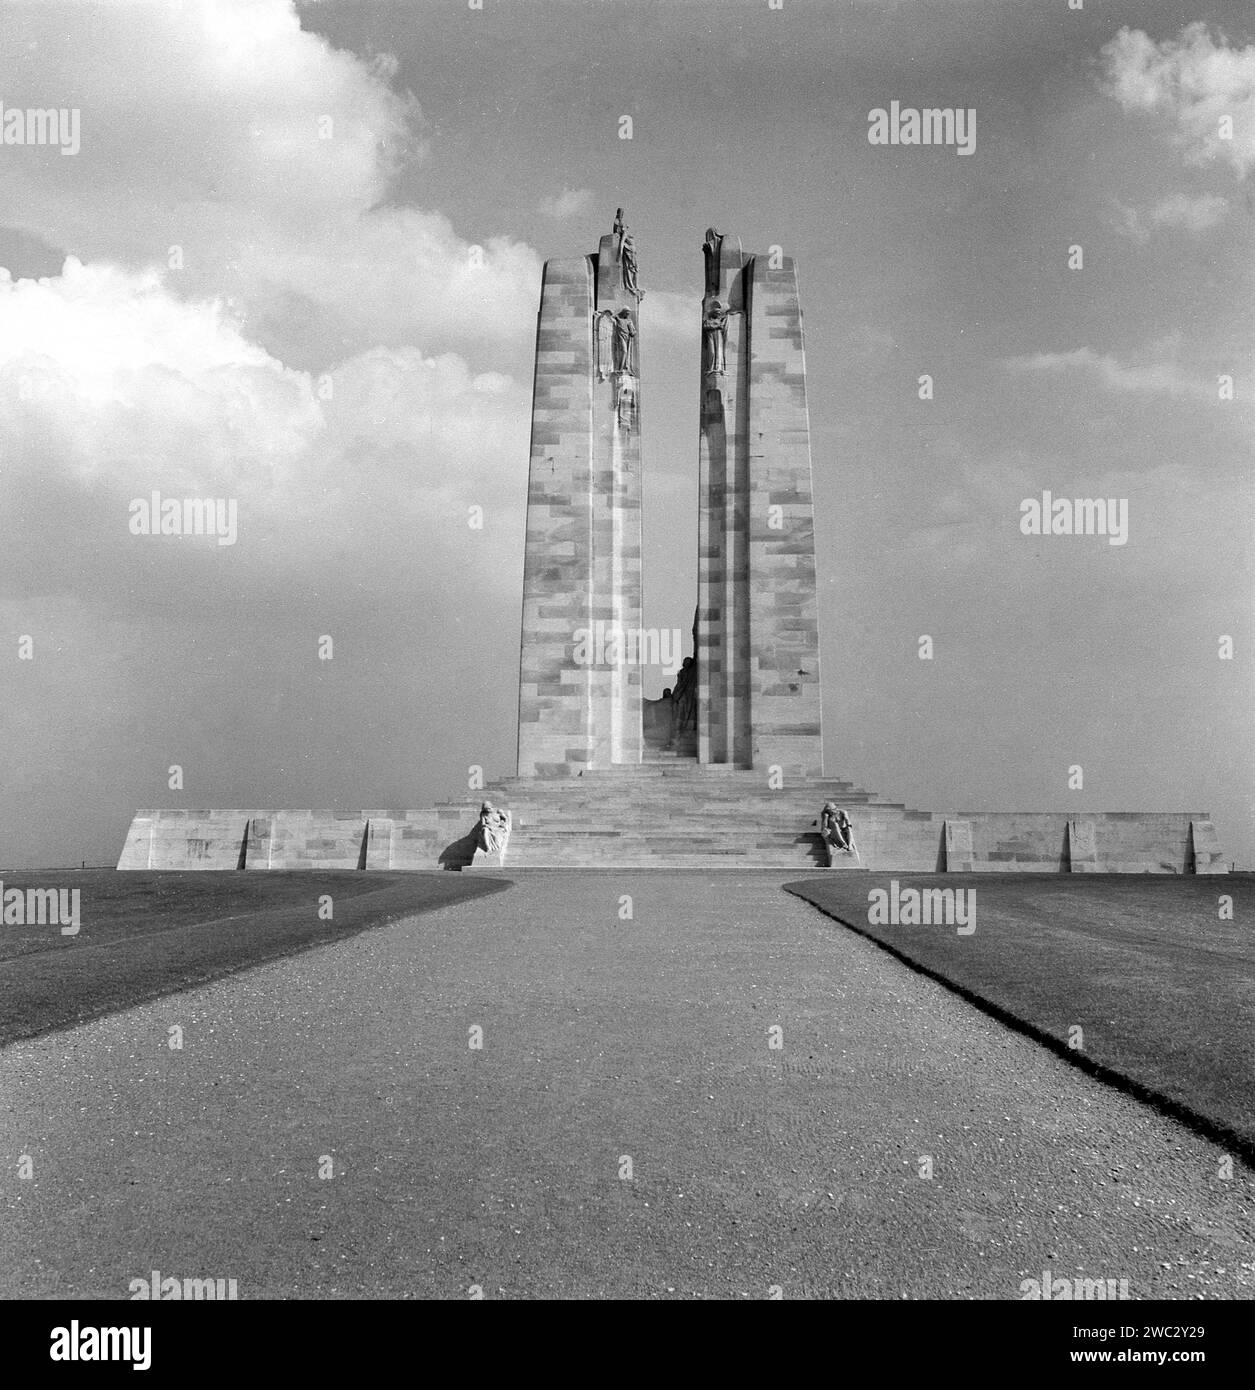 1950s, historical, the Canadian National Vimy Memorial at Vimy Ridge in France. The WW1 Commonwwalth War Graves Commission ( GWGC) memorial commemorates by name more than 11,000 servicemen from Canada who died in France. Built from white limestone, the strikes memorial stands a top of Vimy Ridge, a key lcoation in the Battle of Arras. Stock Photo